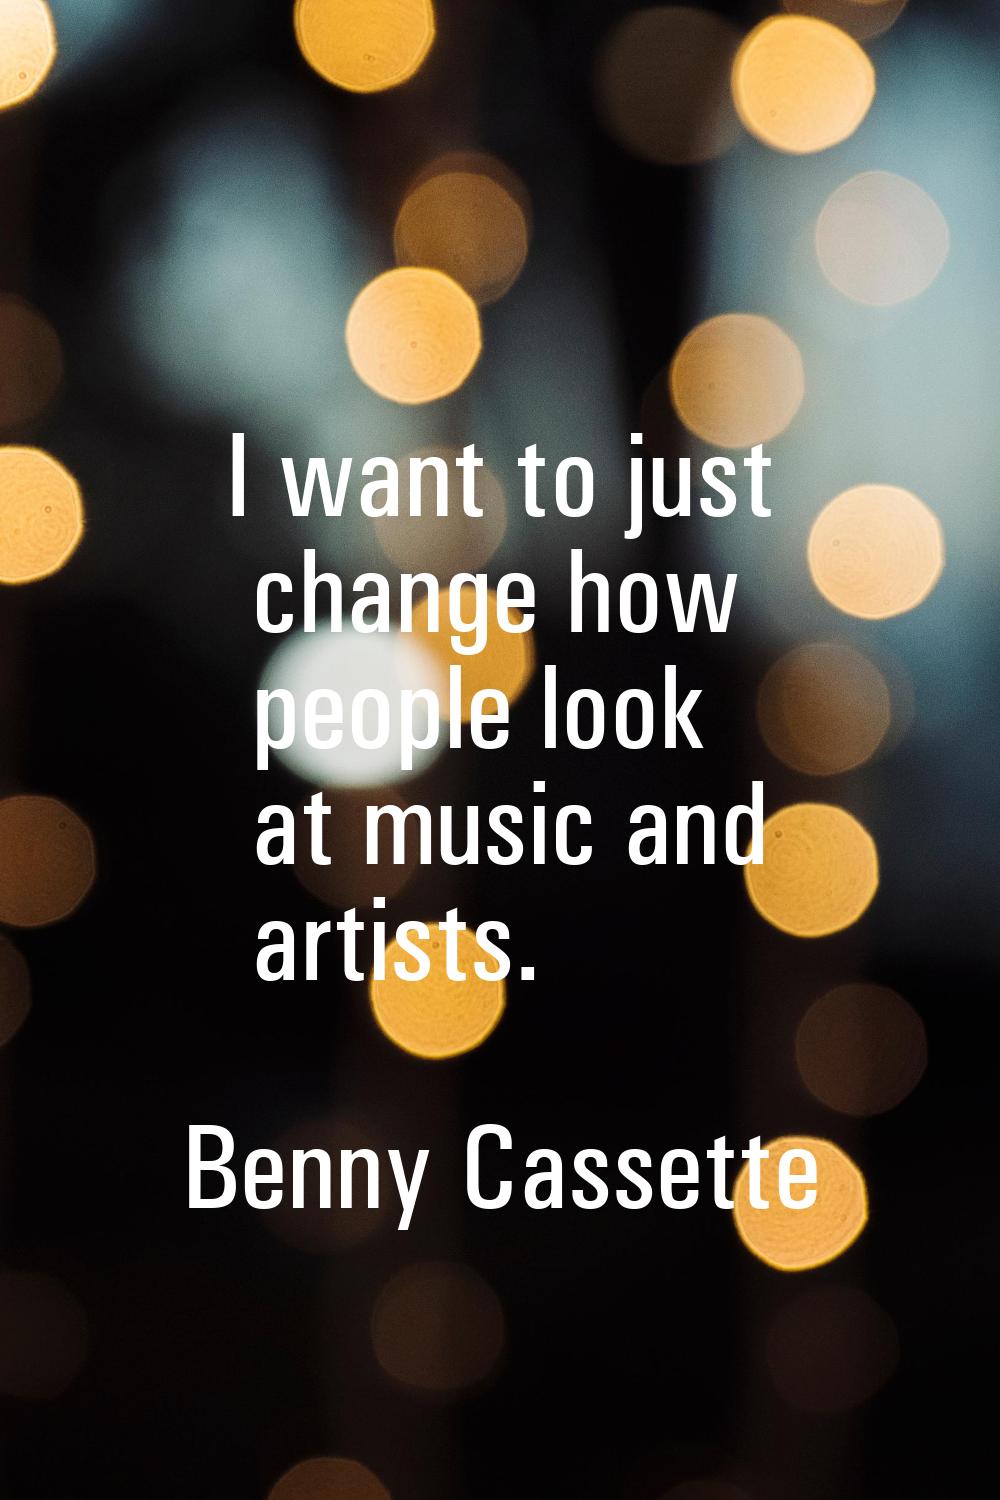 I want to just change how people look at music and artists.